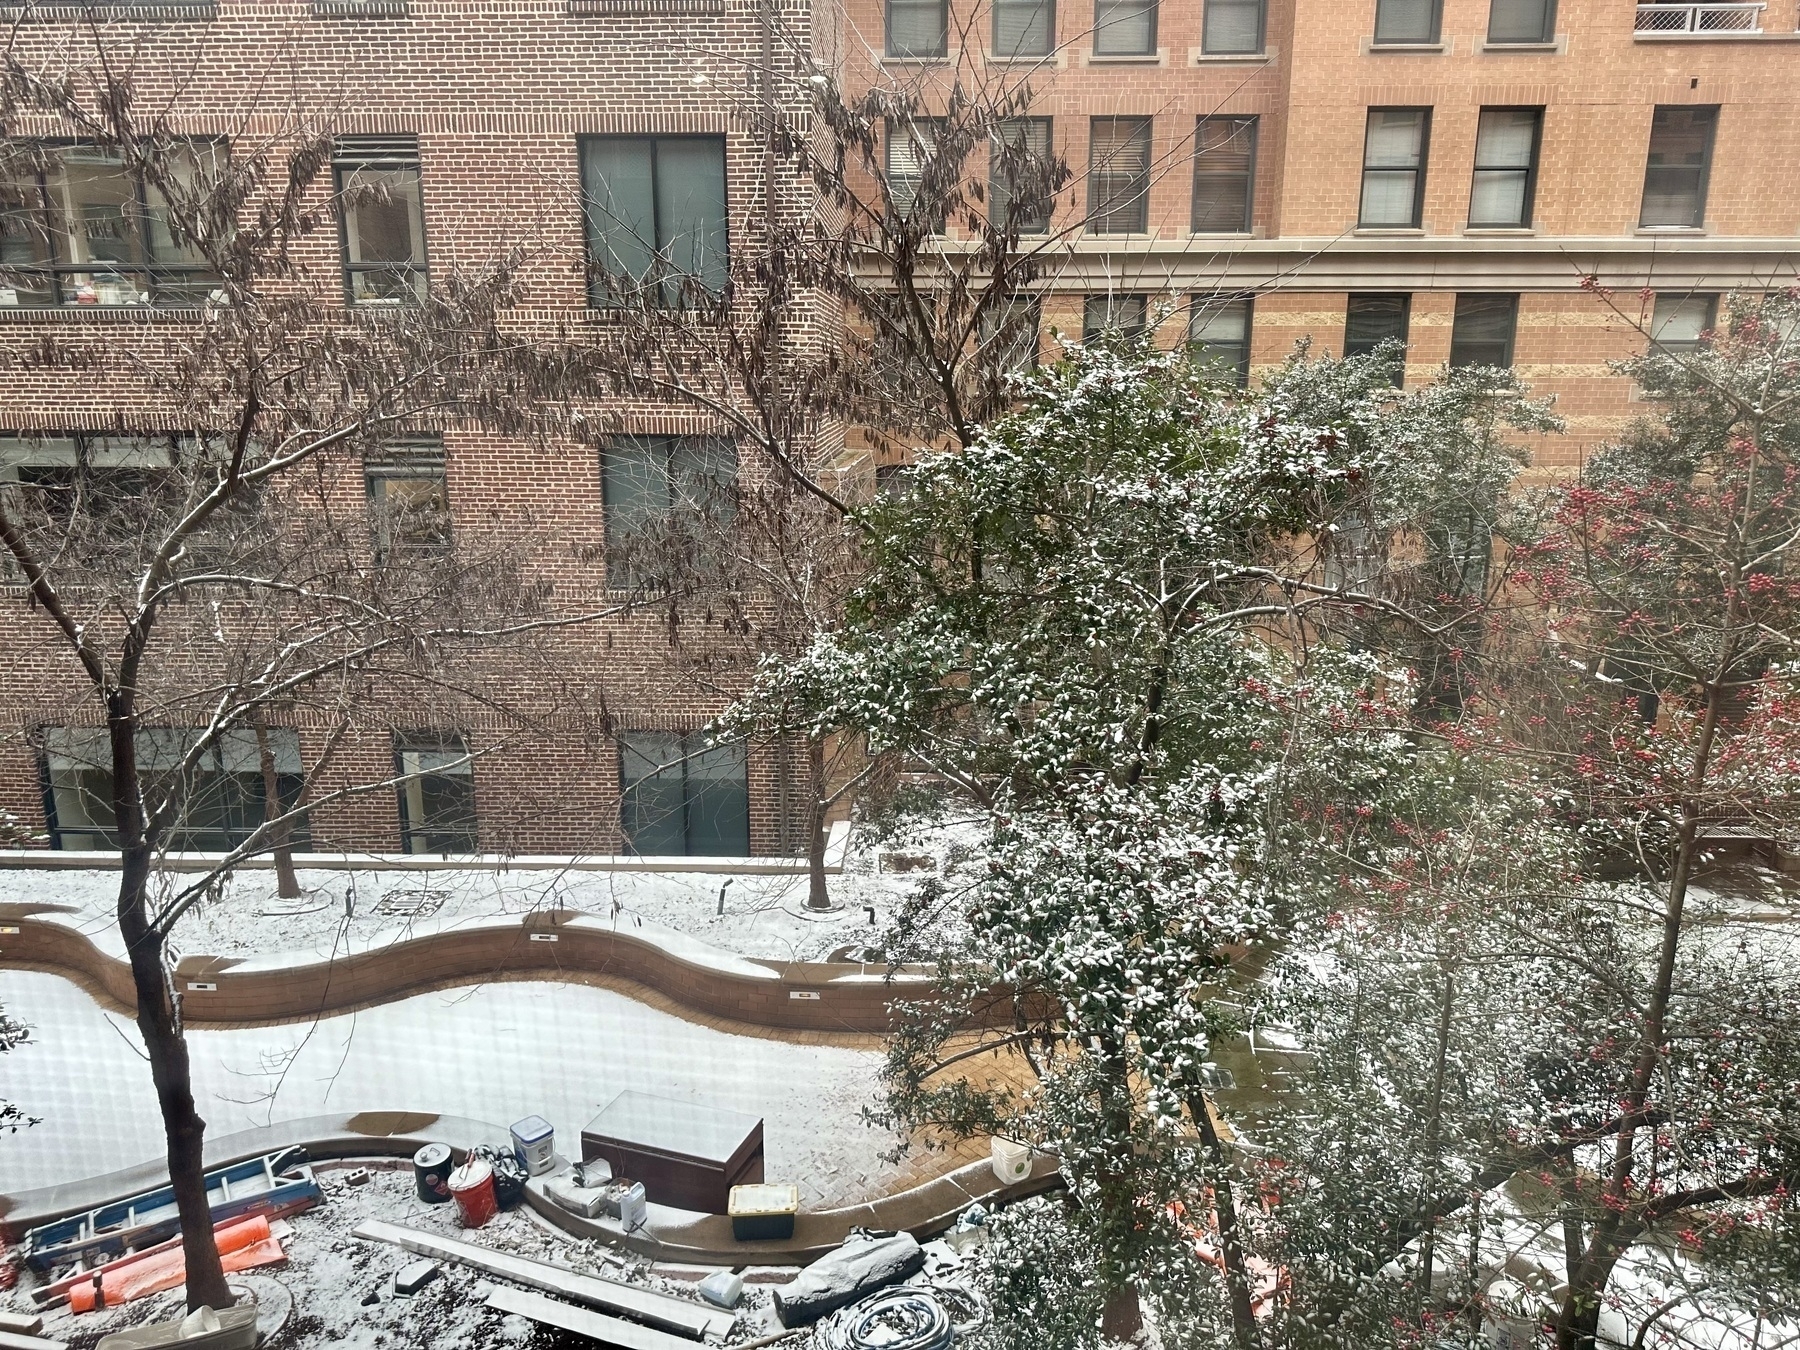 Photo of a courtyard covered by a dusting of snow.